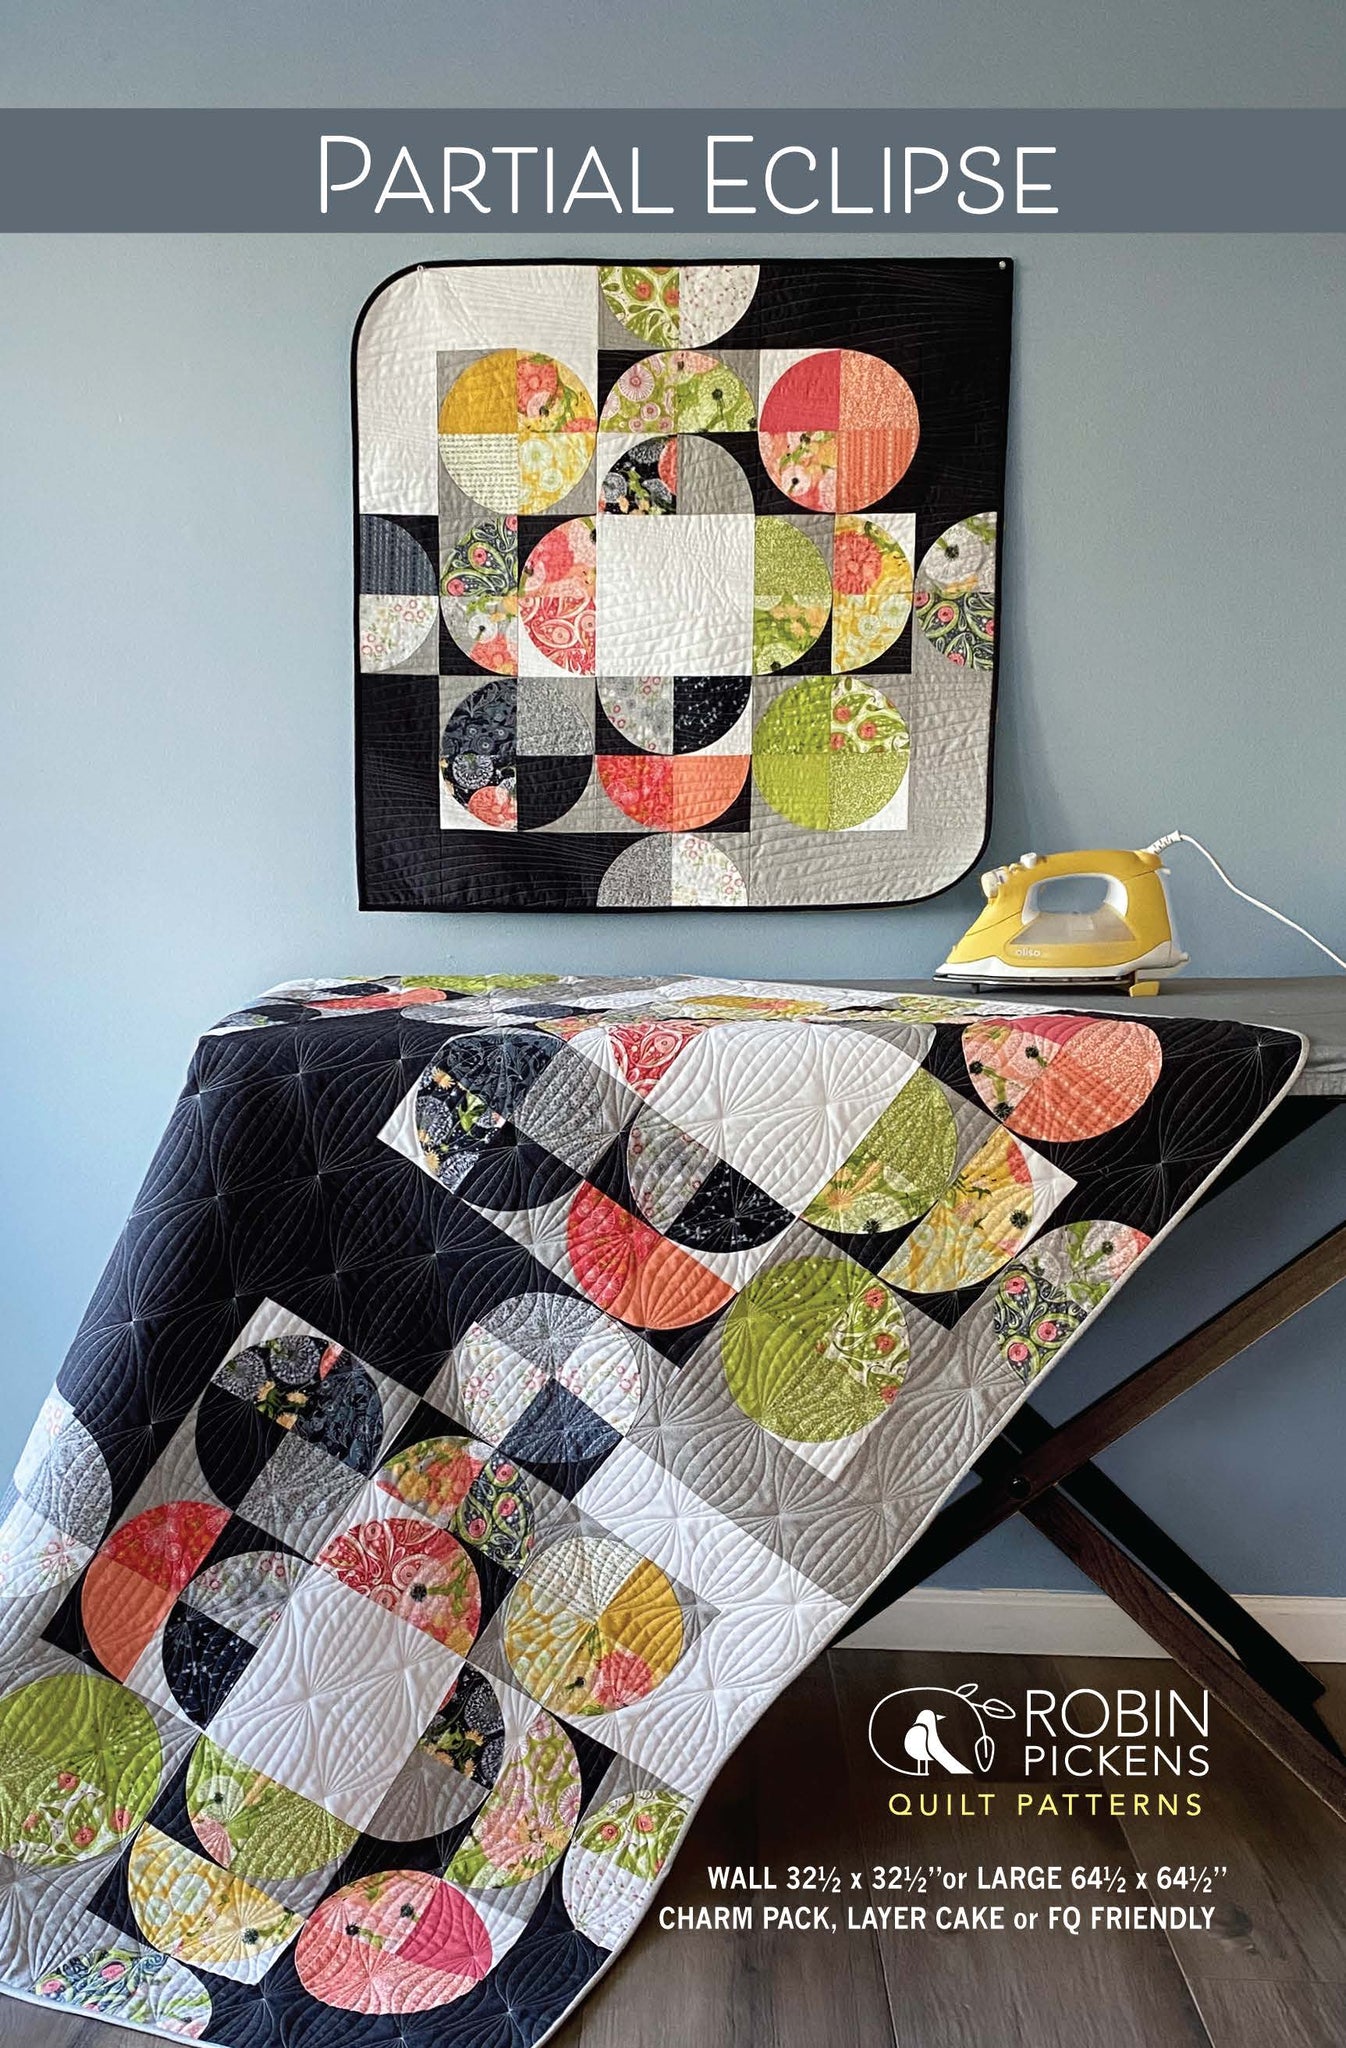 23 Precut Fabric Quilt Patterns: Jelly Roll, Charm Pack, Fat Quarter  Patterns, and More